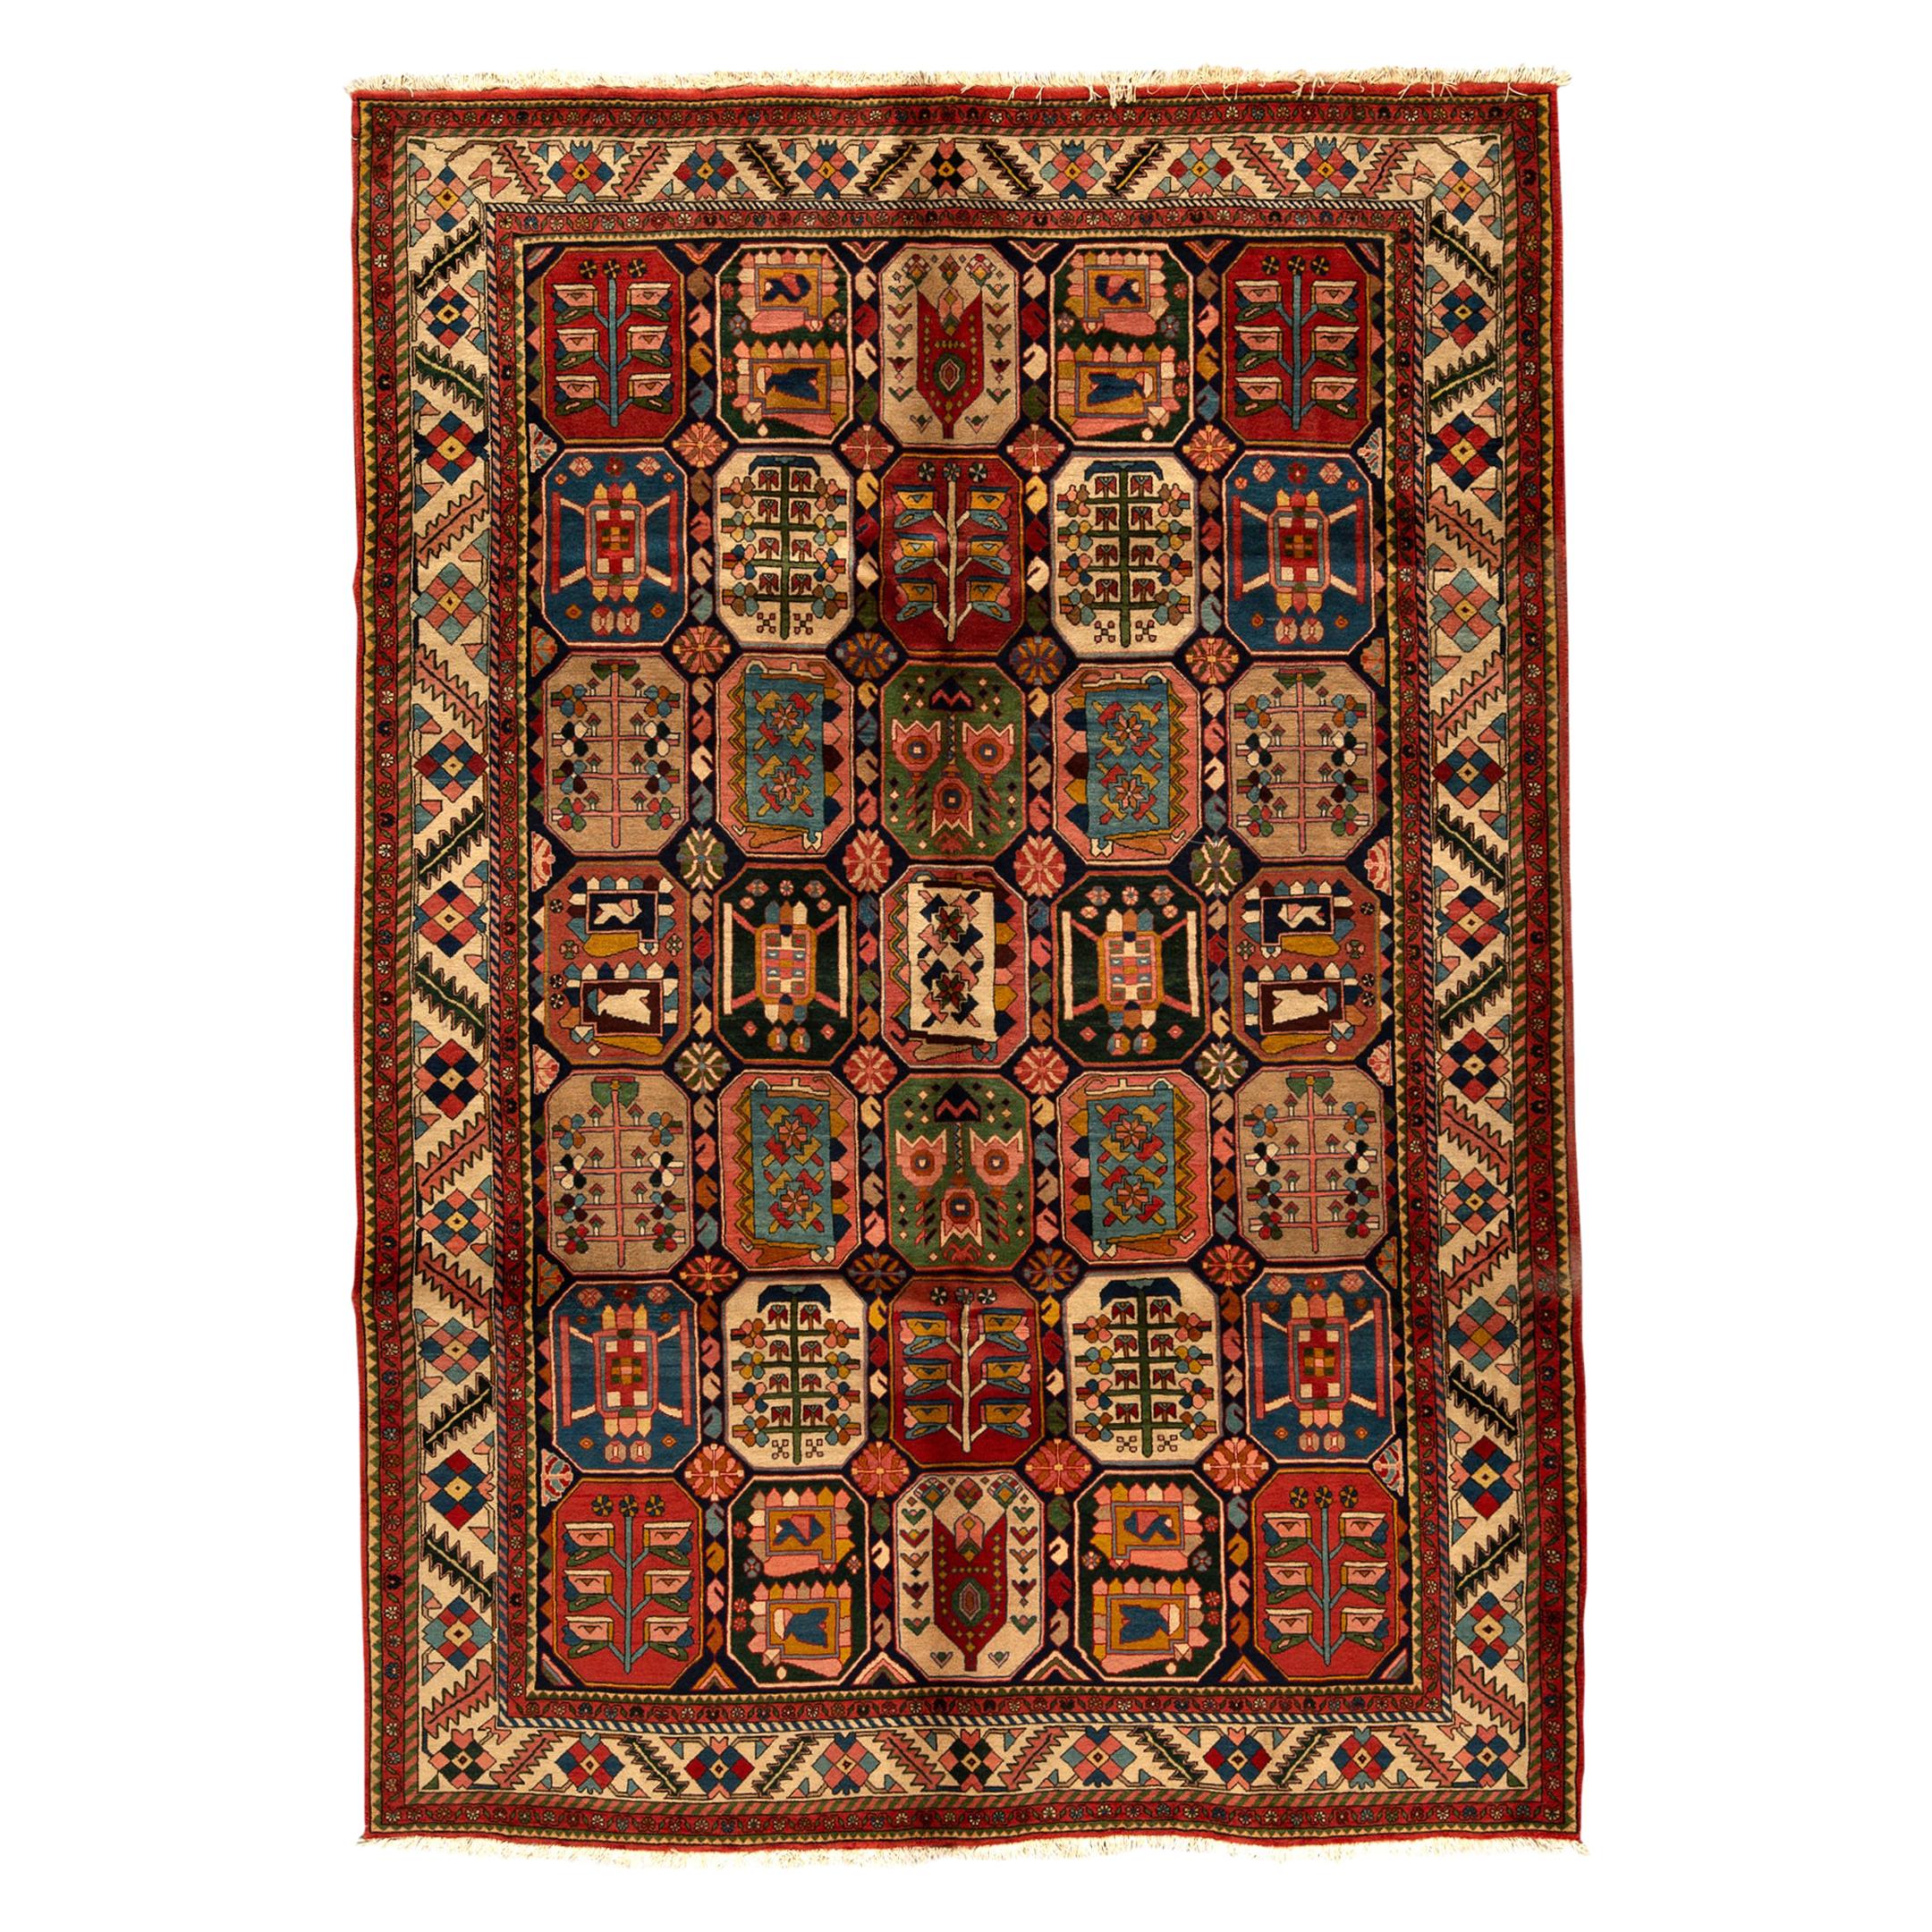  Antique Persian fine Traditional Handwoven Luxury Wool Multi Rug